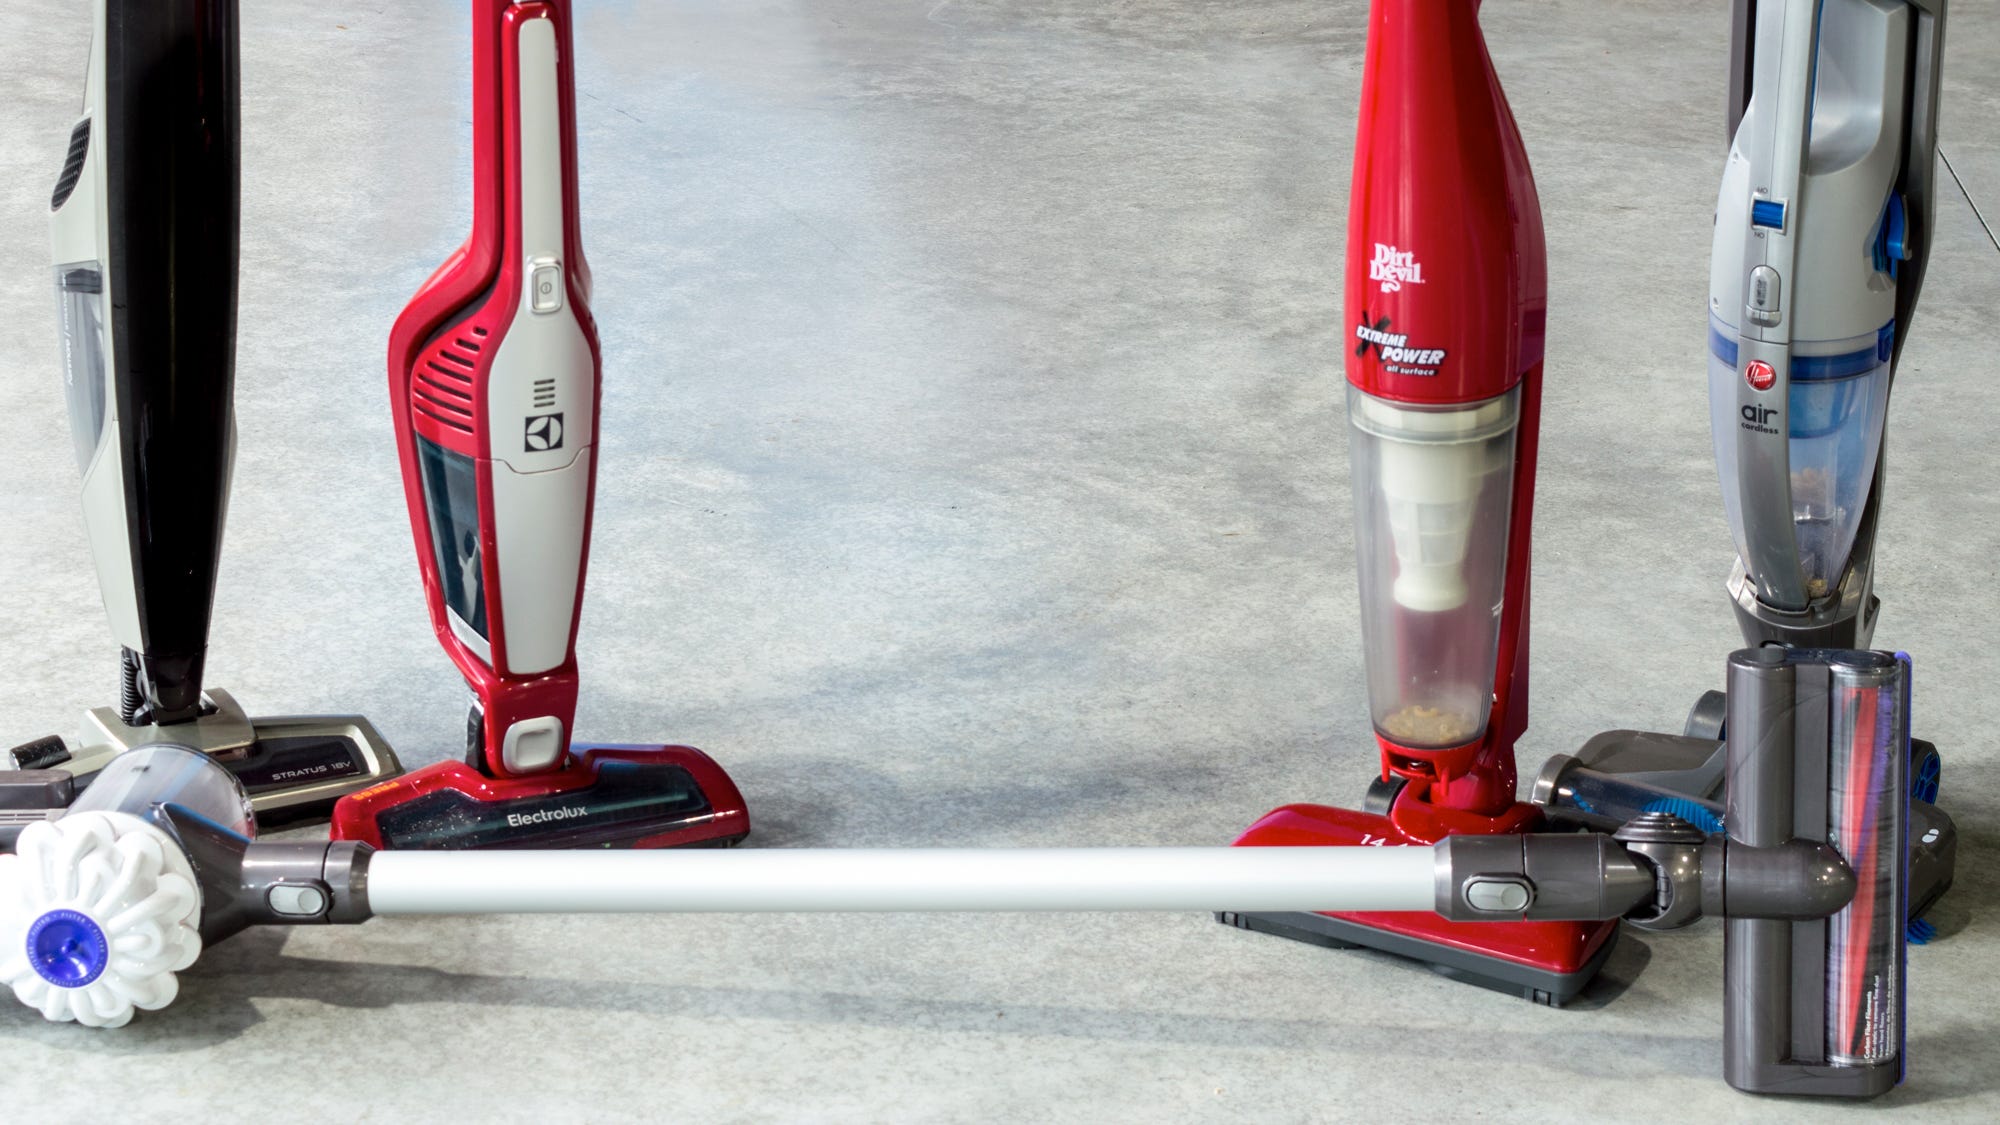 The Best Cordless Vacuums Of 2020, Top Cordless Vacuum For Hardwood Floors